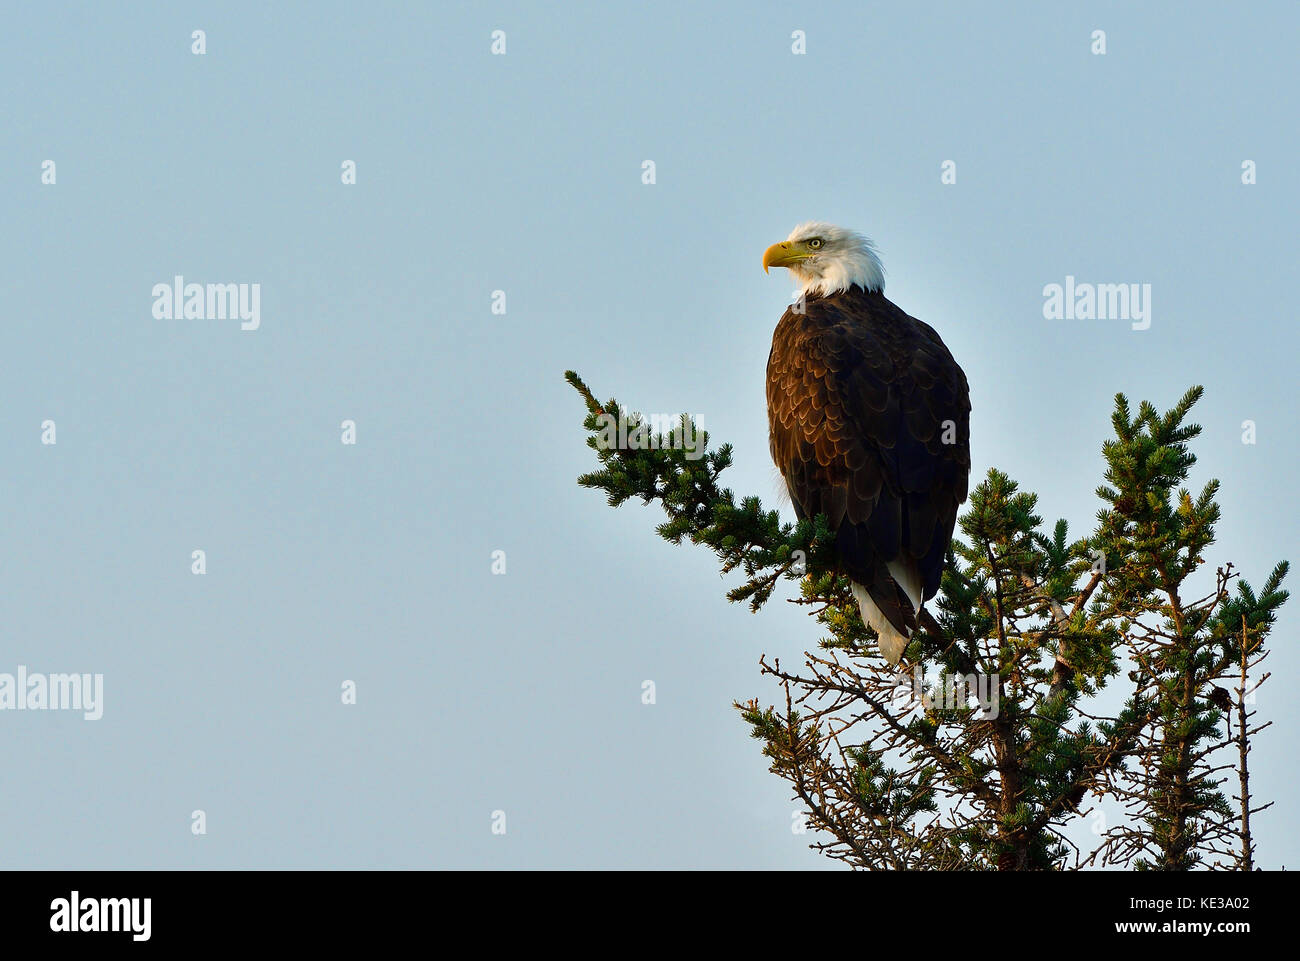 A mature bald eagle ' Haliaeetus leucocephalus'; perched on the top of a spruce tree in Jasper National Park, Alberta Canada Stock Photo